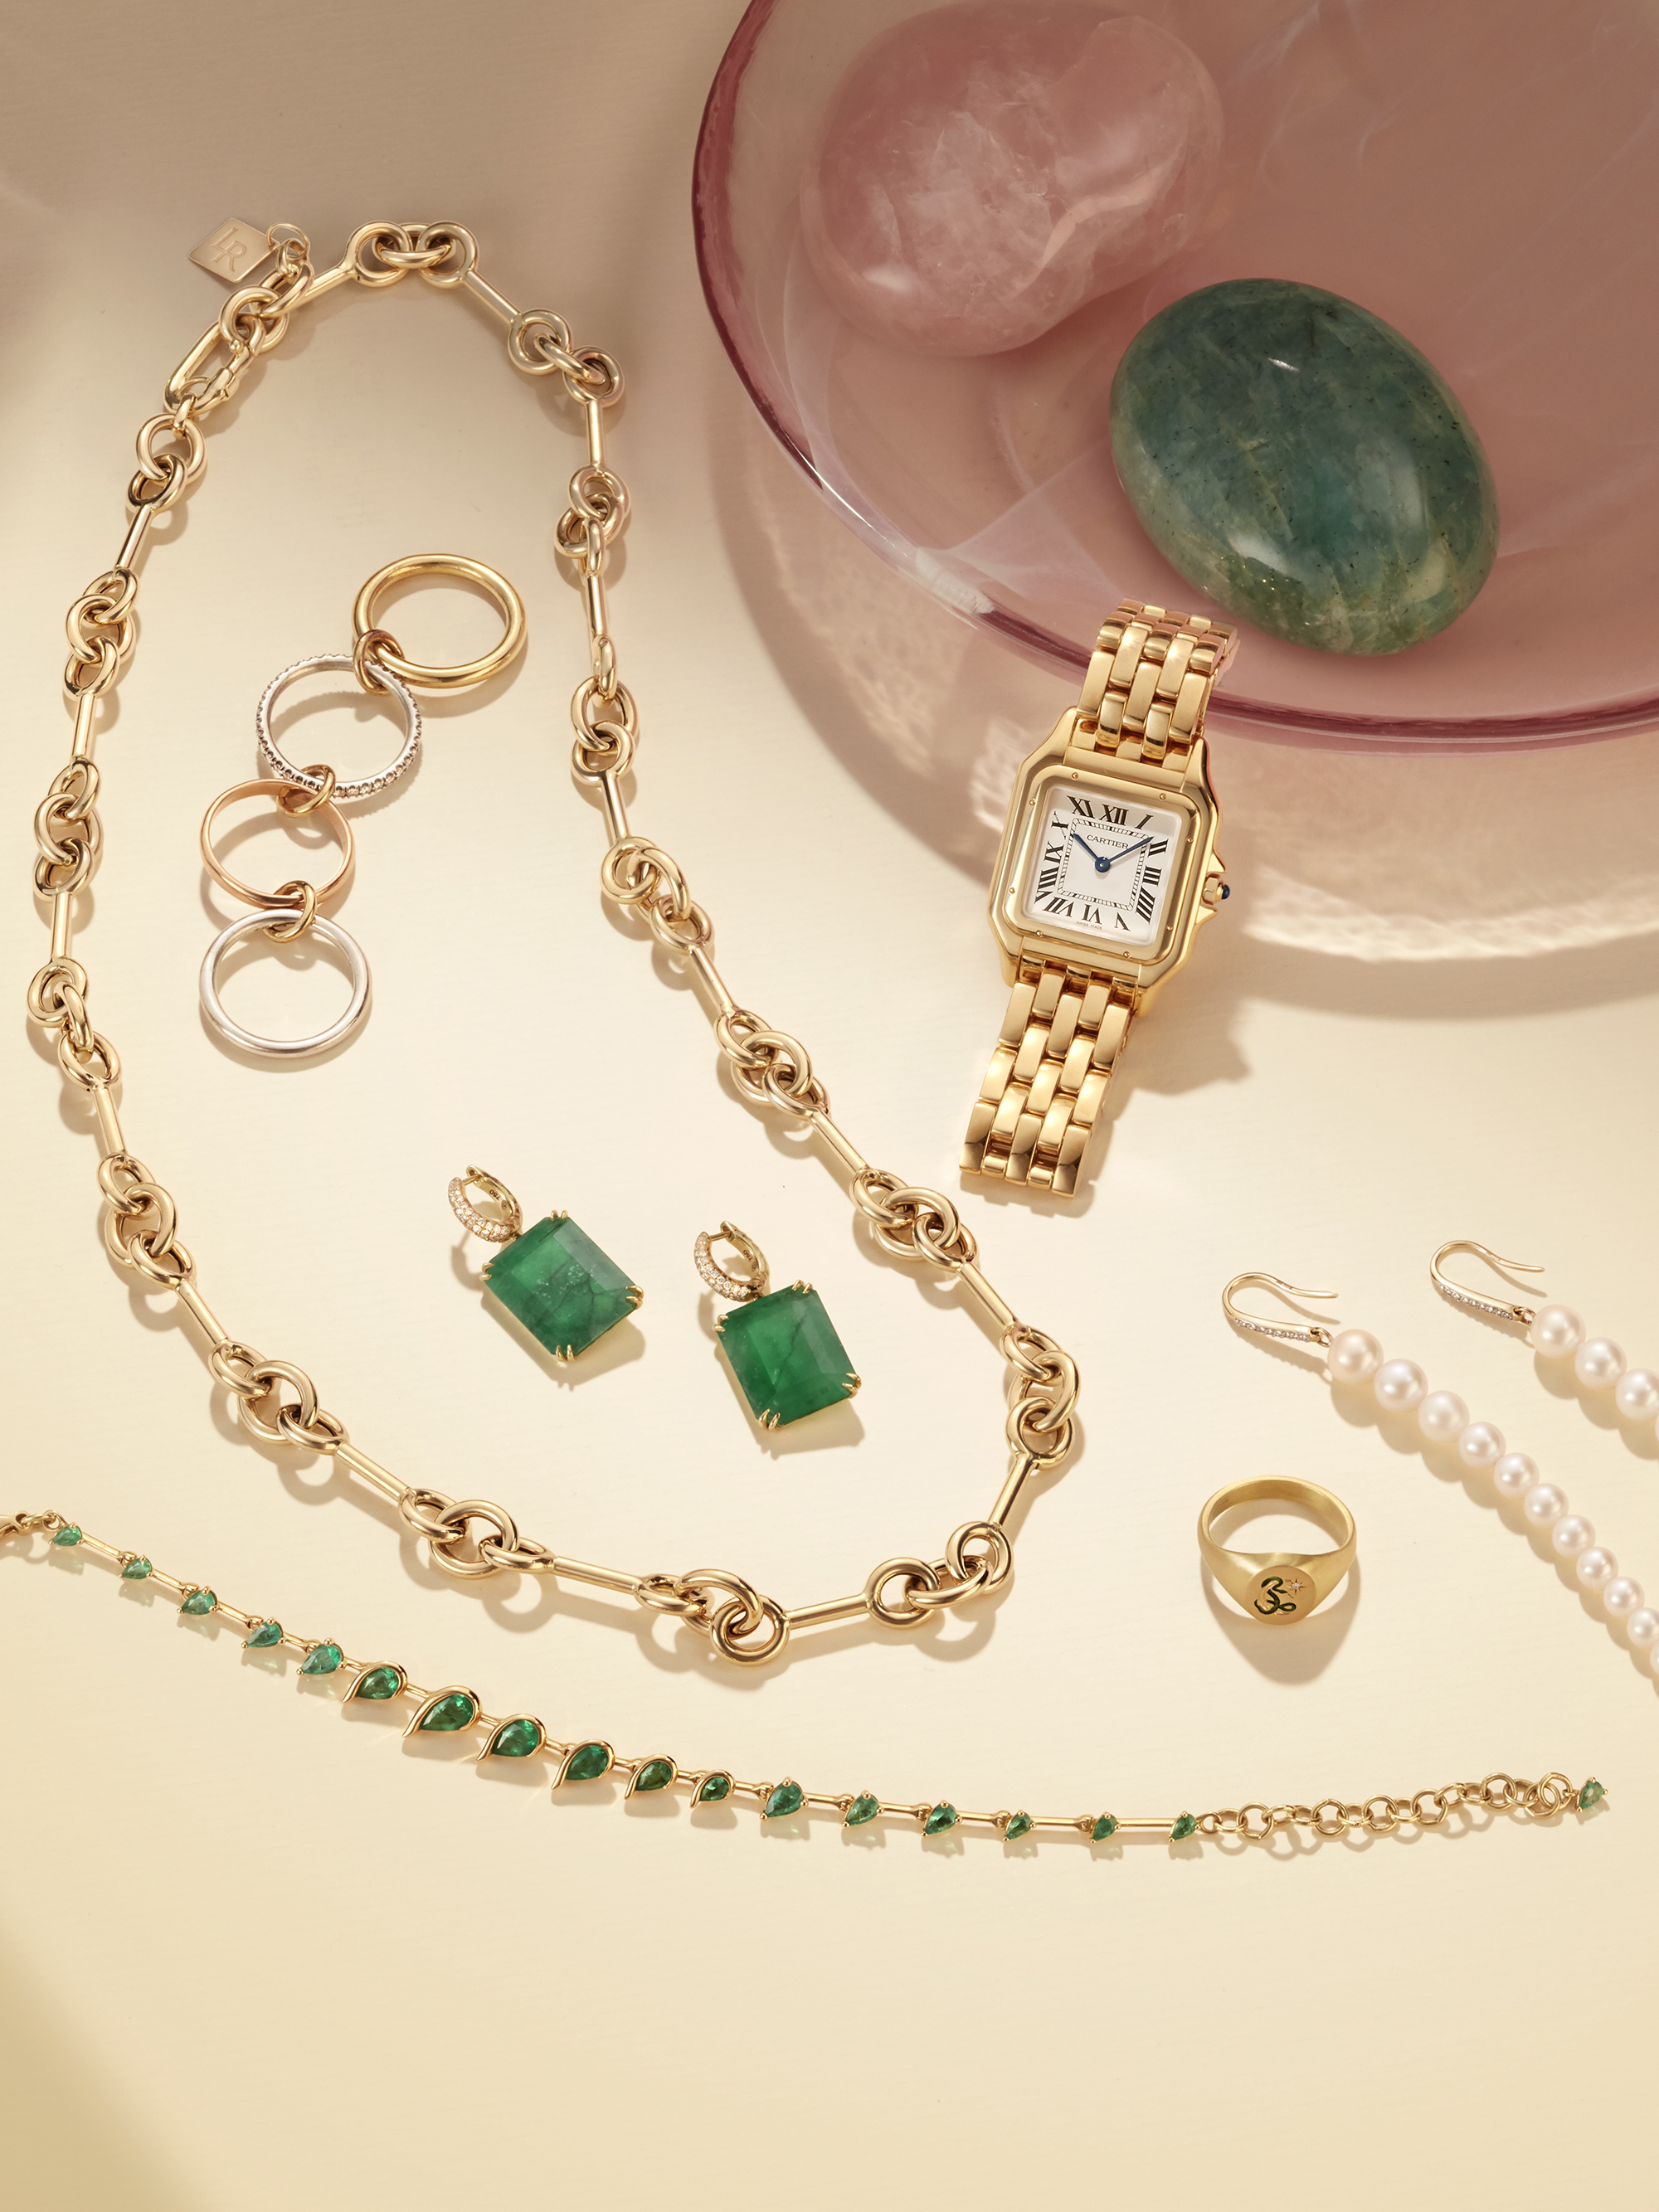 5 Investment Jewelry Pieces That Are Future Heirlooms